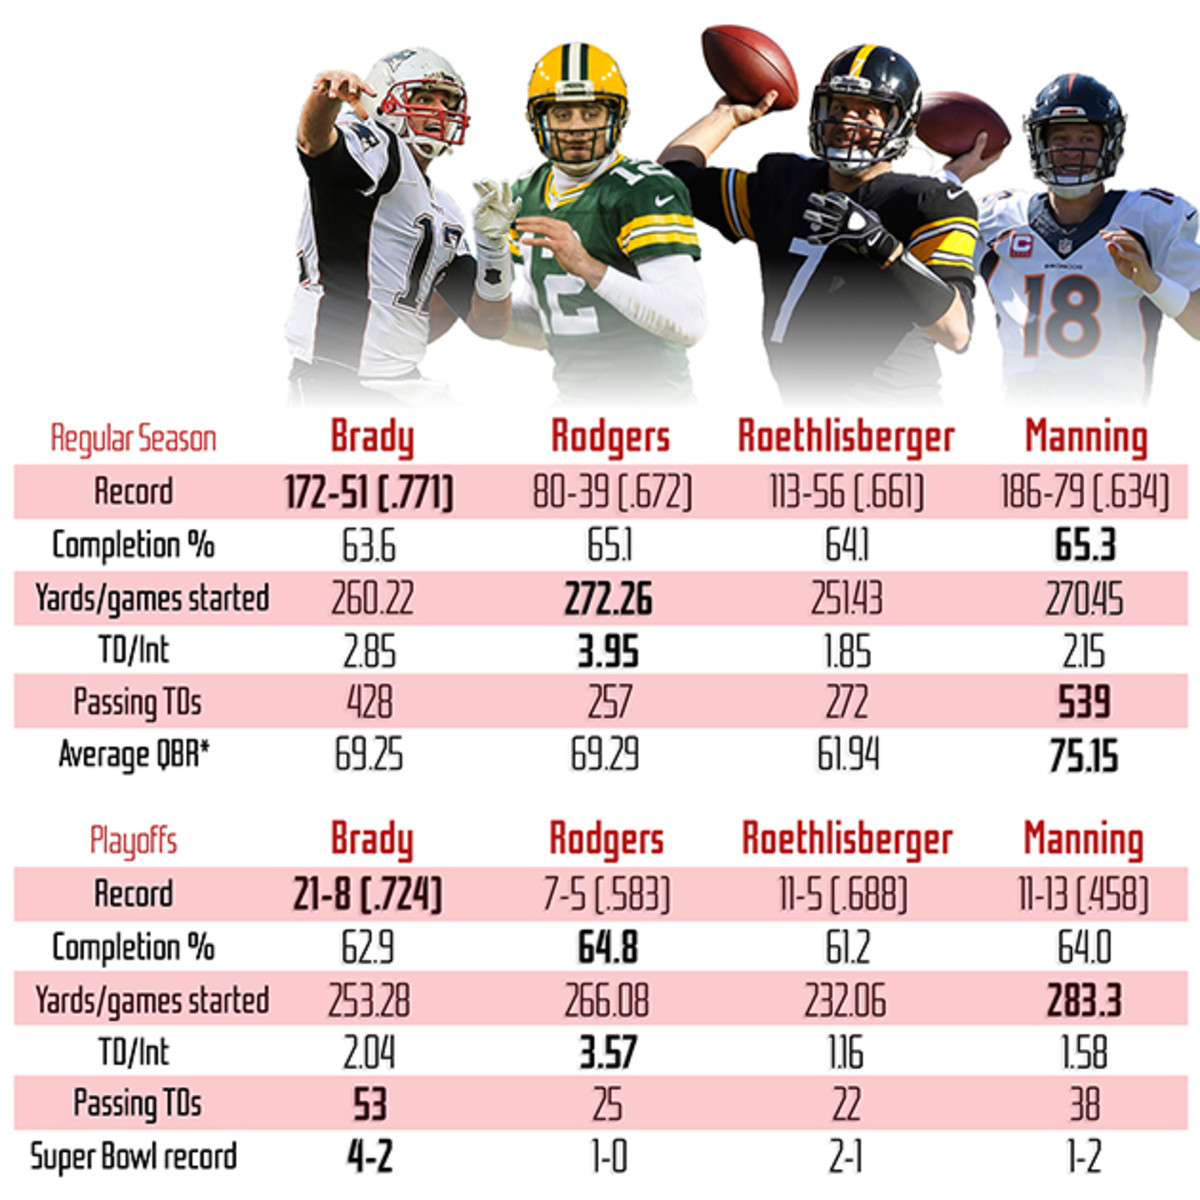 Comparing NFL's Brady, Manning, Rodgers and Roethlisberger